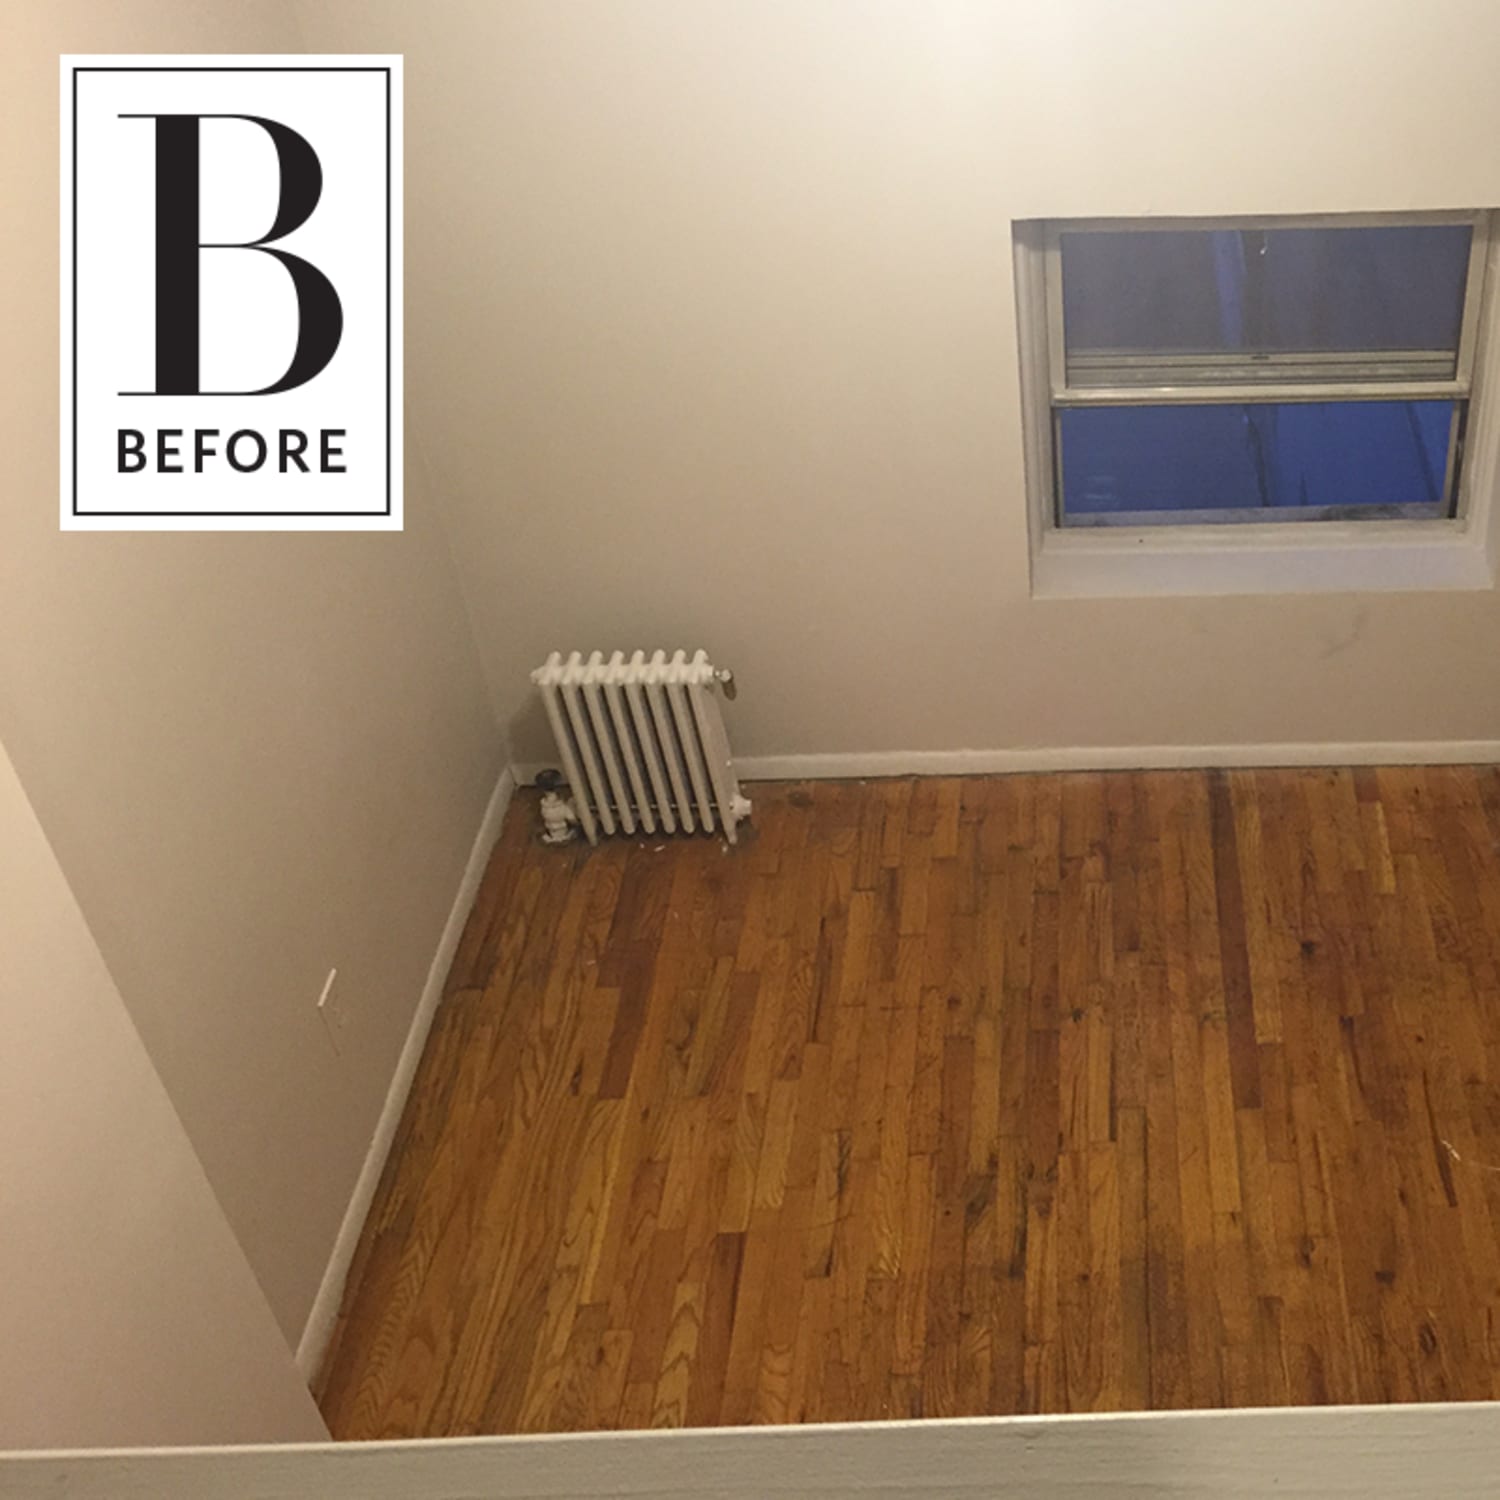 Before After A Blank 250 Square Foot Space Becomes A Cozy Home Apartment Therapy